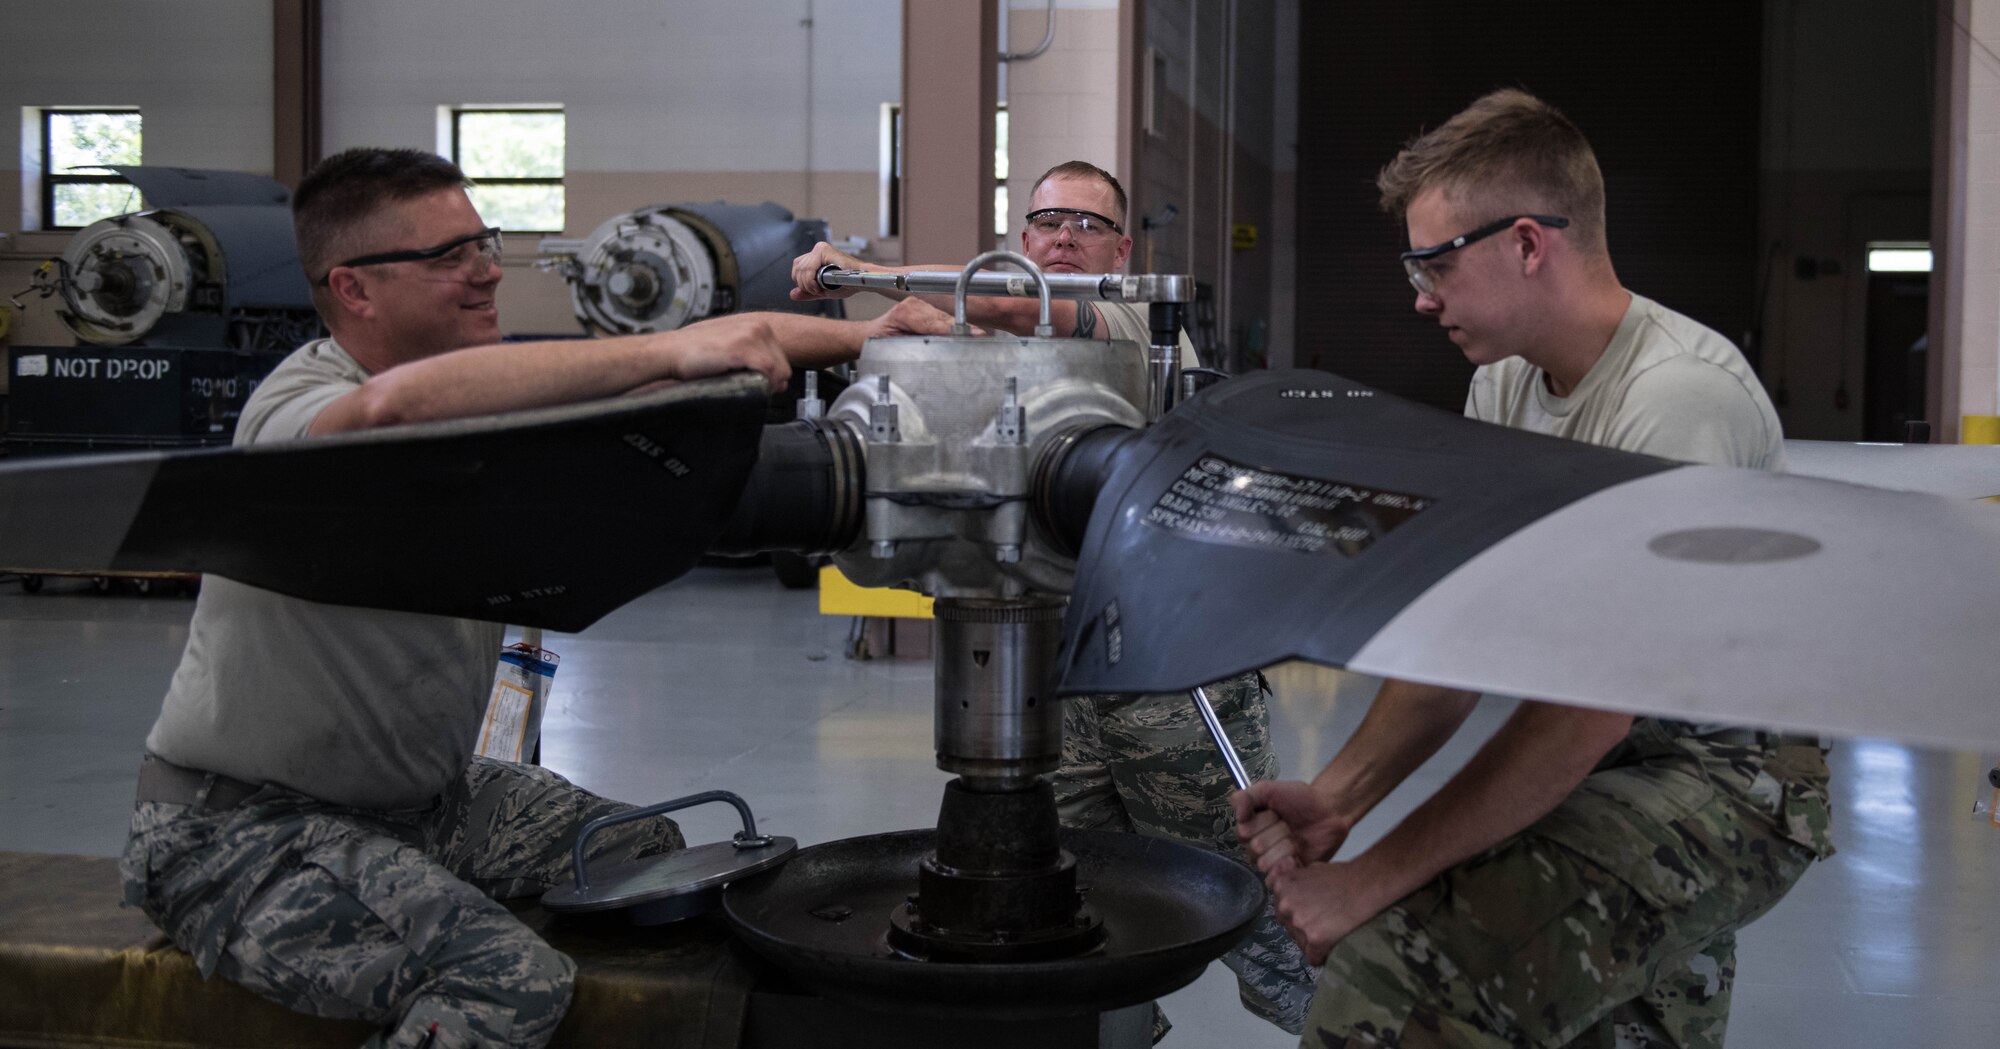 Tech. Sgt. Steve Lew (left), an aerospace propulsion technician, Master Sgt. Shawn Froehling (middle), a flight chief, and Senior Airman Sean Kenny (right), an aerospace propulsion technician, all assigned to the 910th Maintenance Squadron, are torqueing the bolts as a step in the assembly procedure, Aug. 11, 2019 at Youngstown Air Reserve Station.